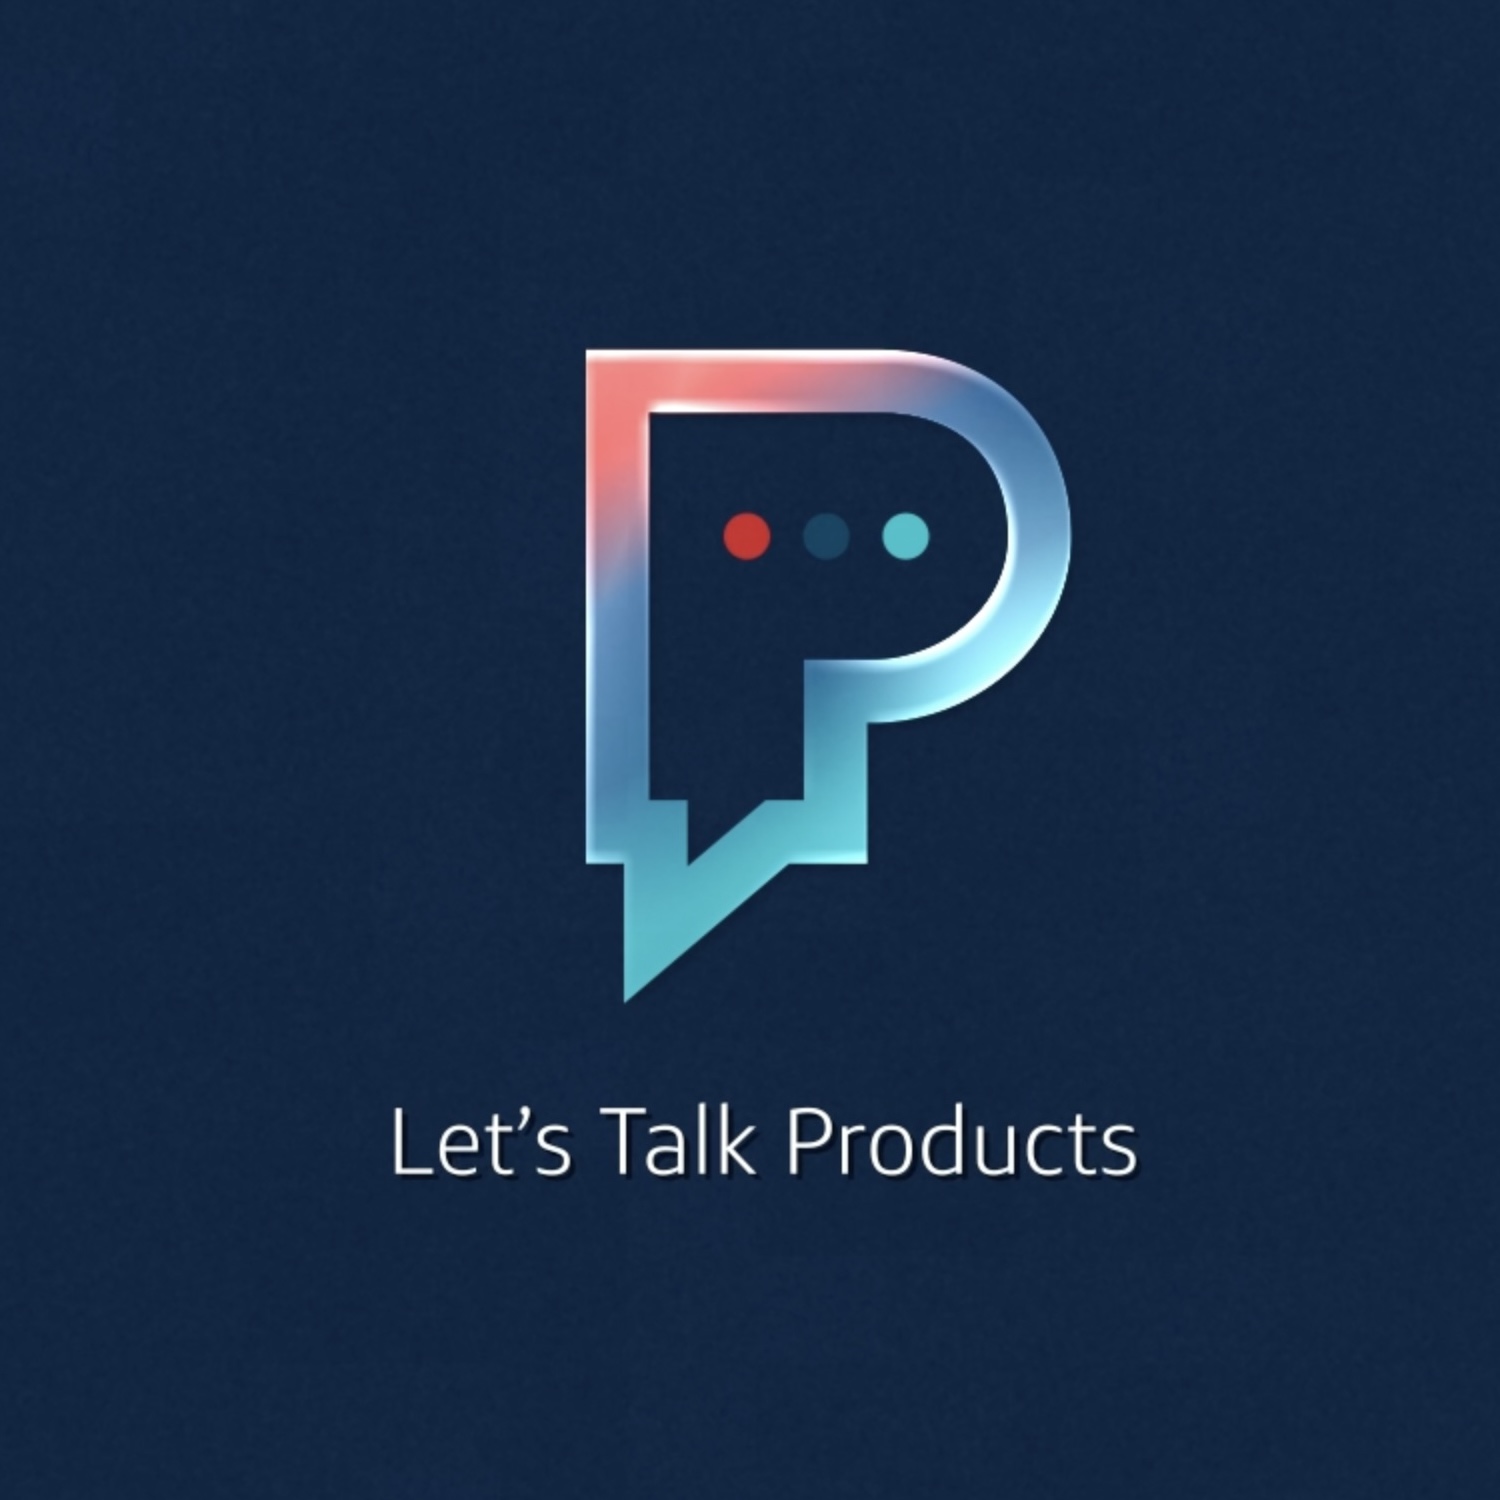 Let’s Talk Product Animation